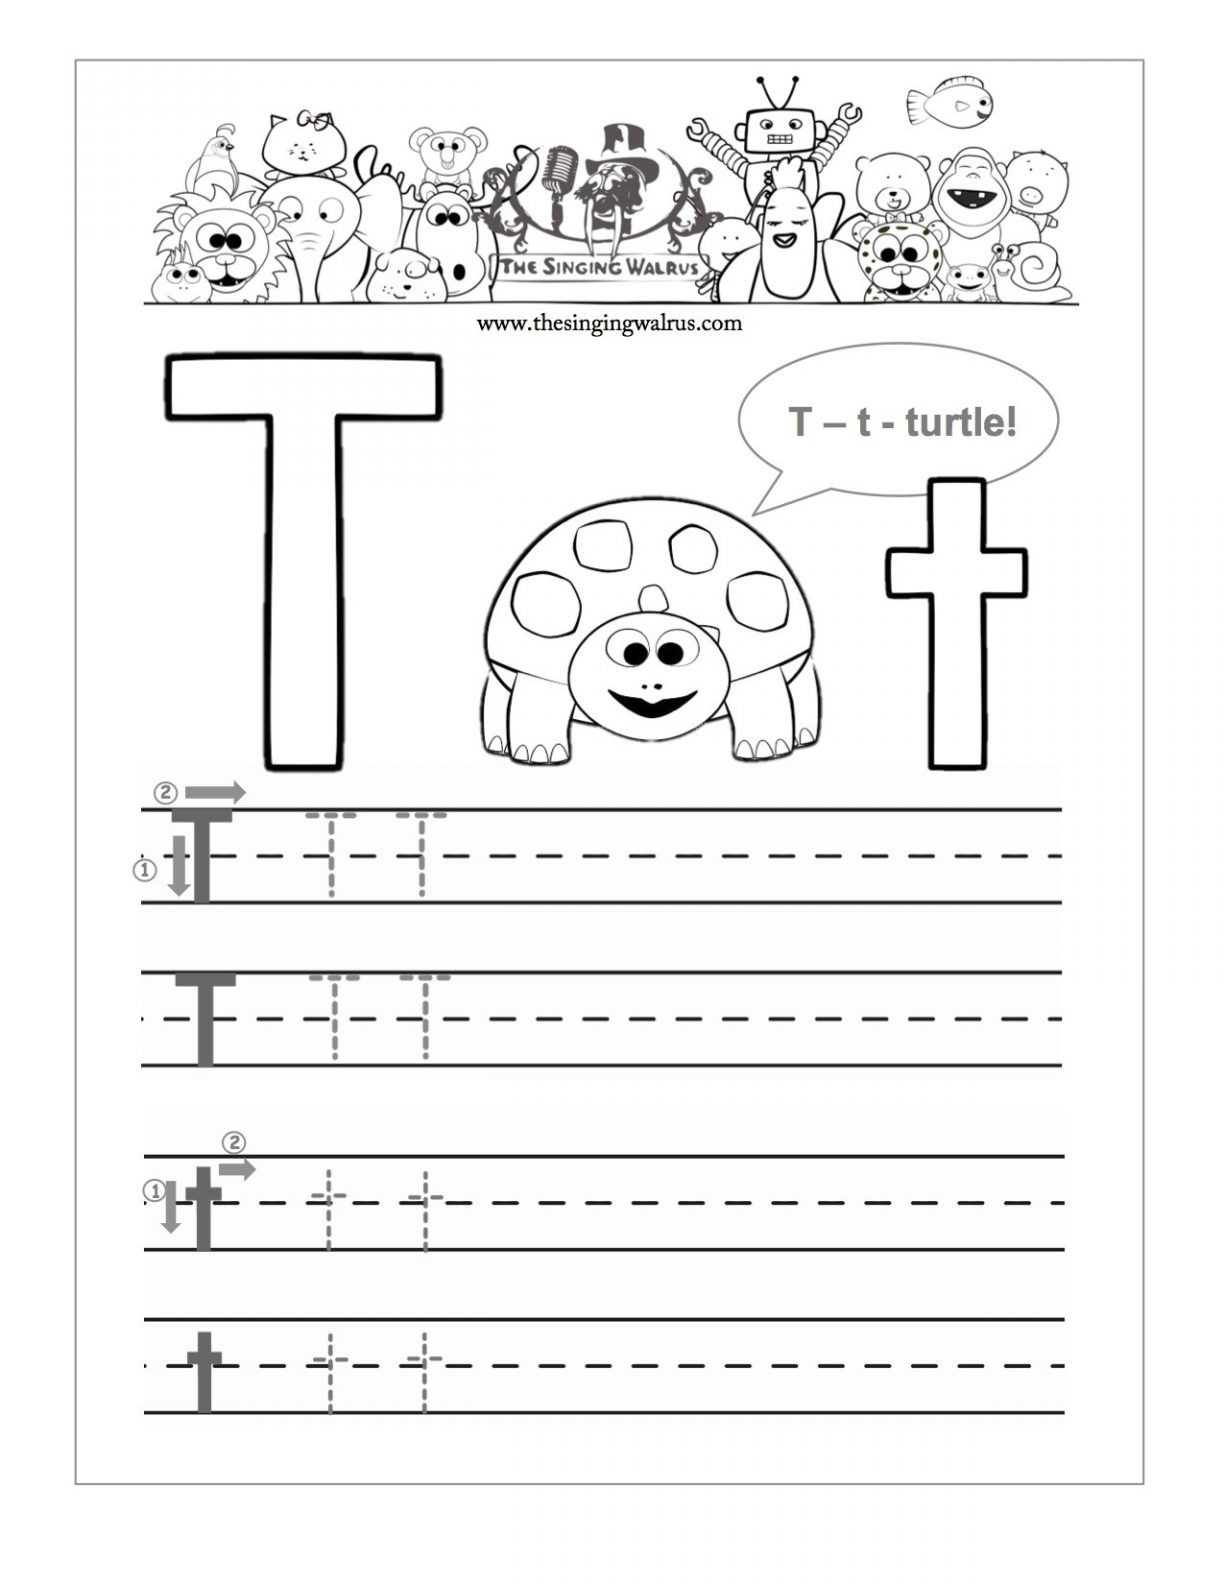 20 Learning The Letter T Worksheets | Kittybabylove intended for Letter T Worksheets Free